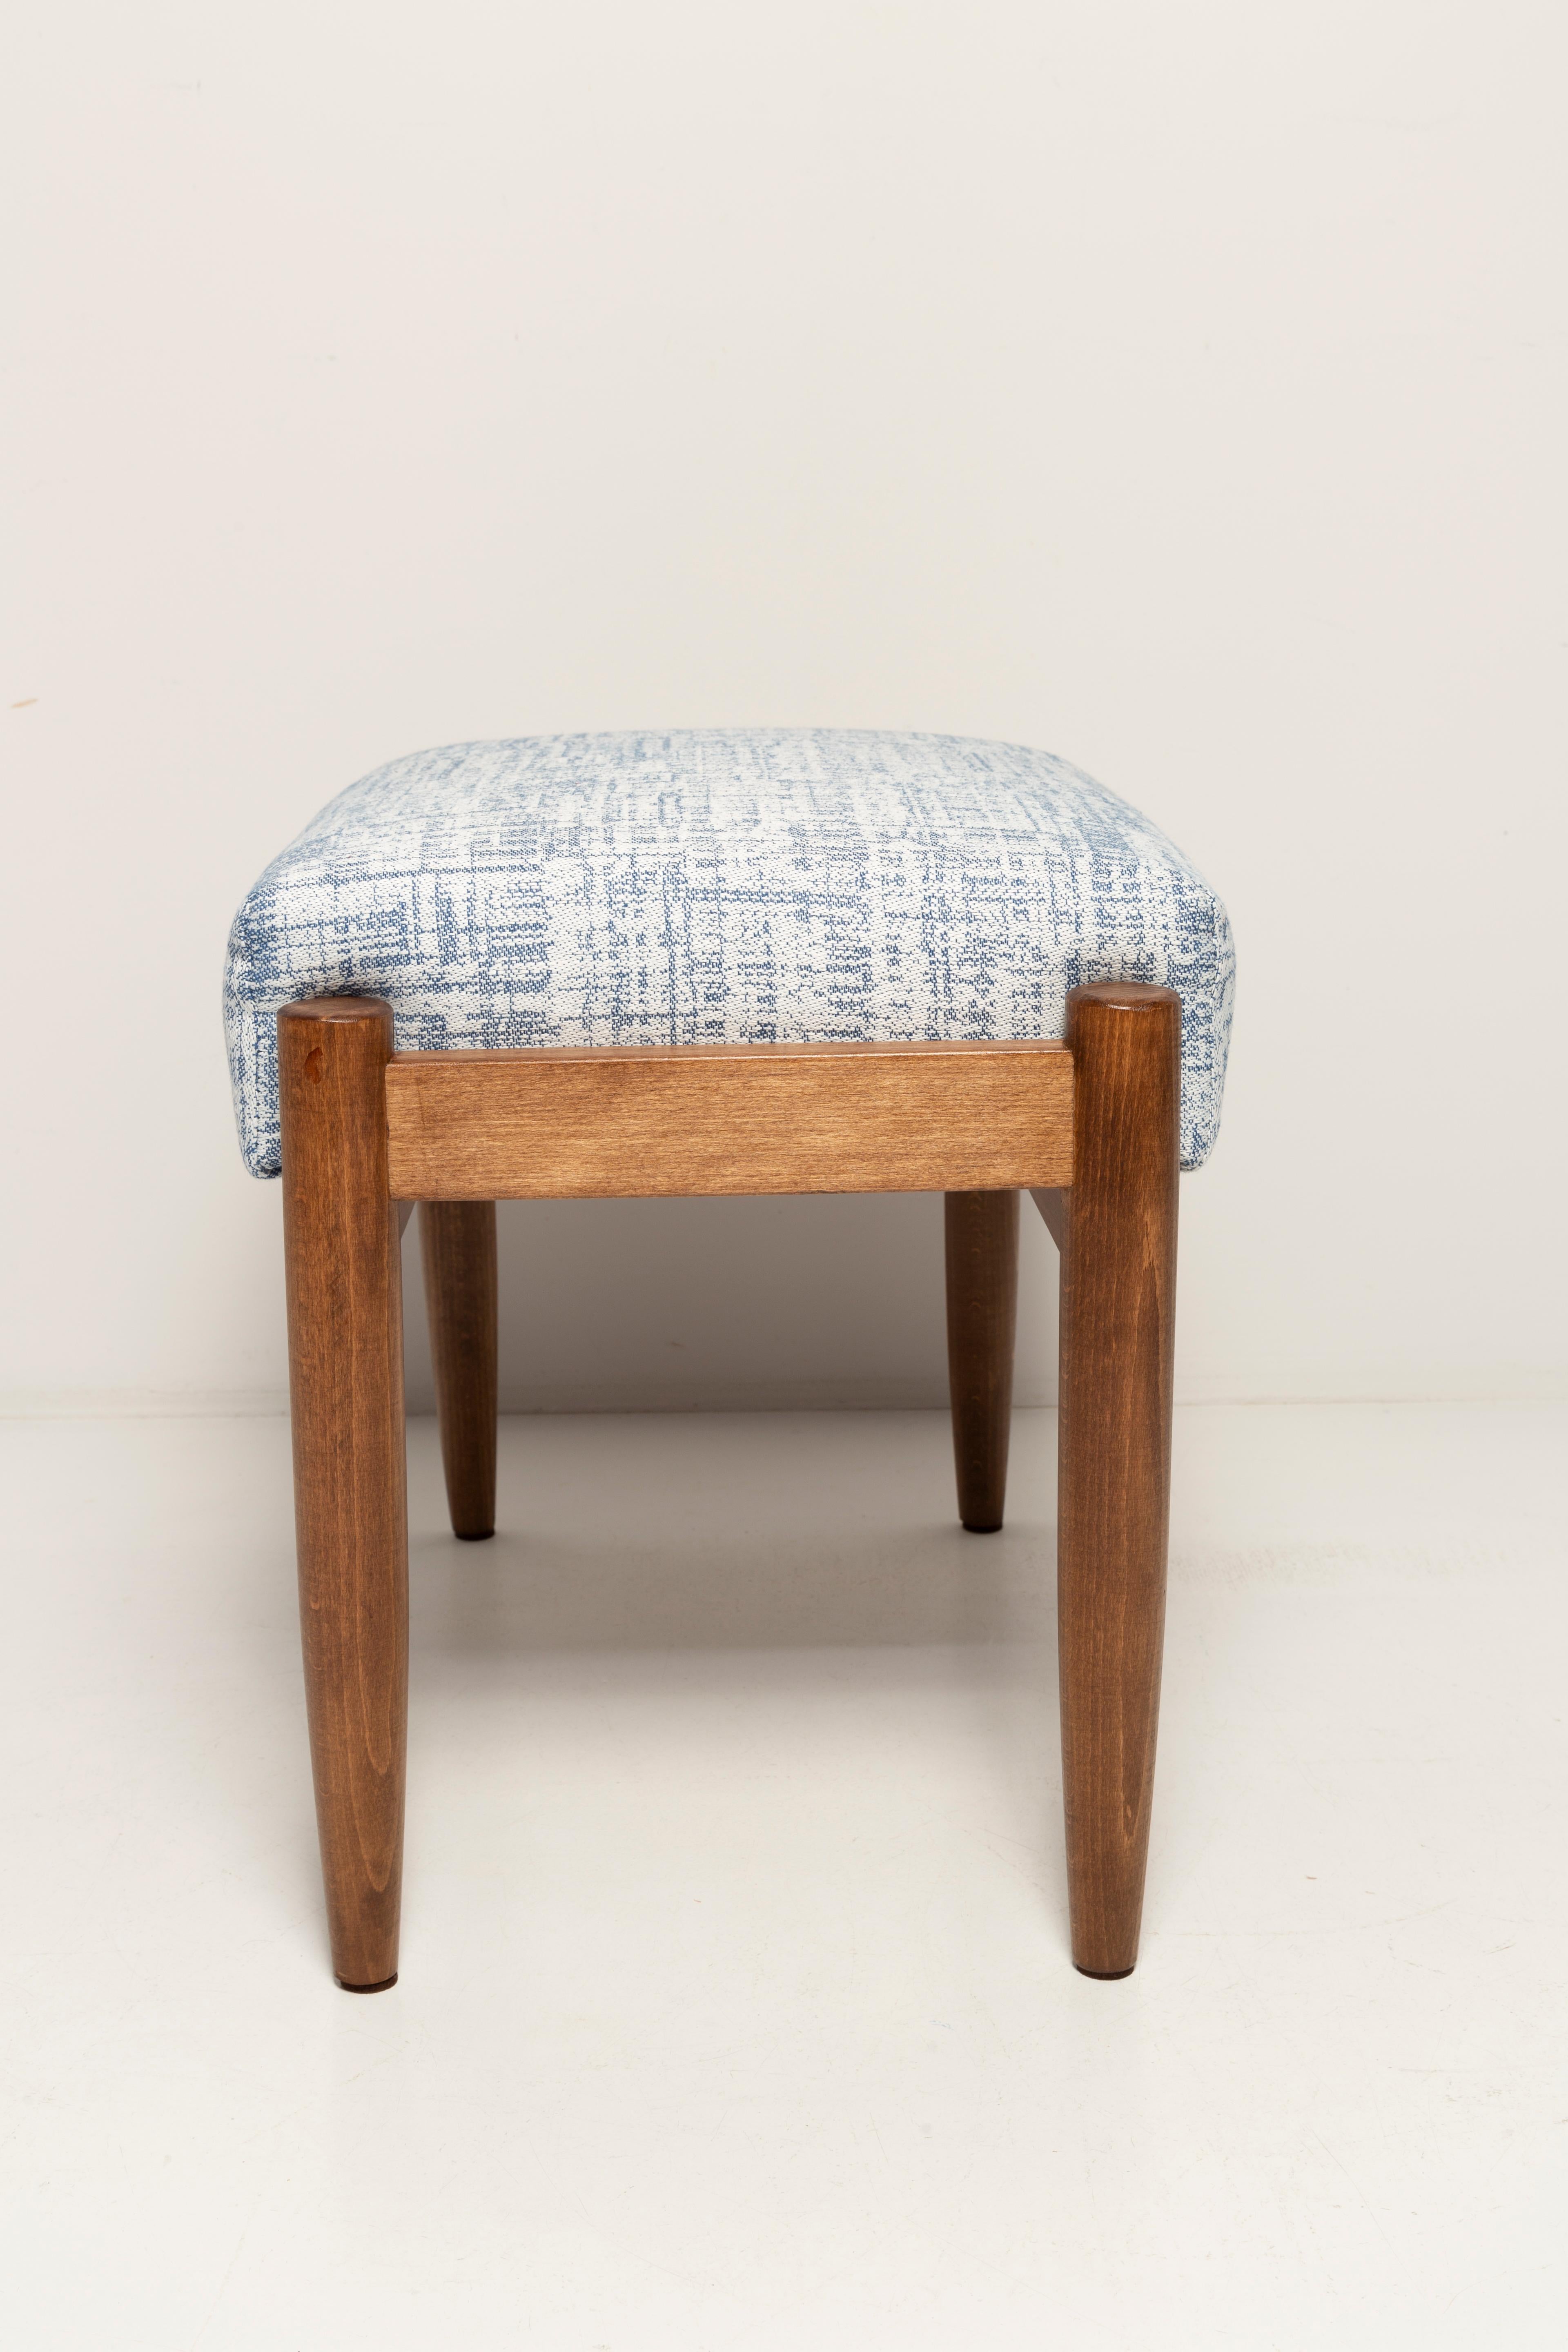 Midcentury Vintage White and Blue Linen Stool, Edmund Homa, Europe, 1960s For Sale 1